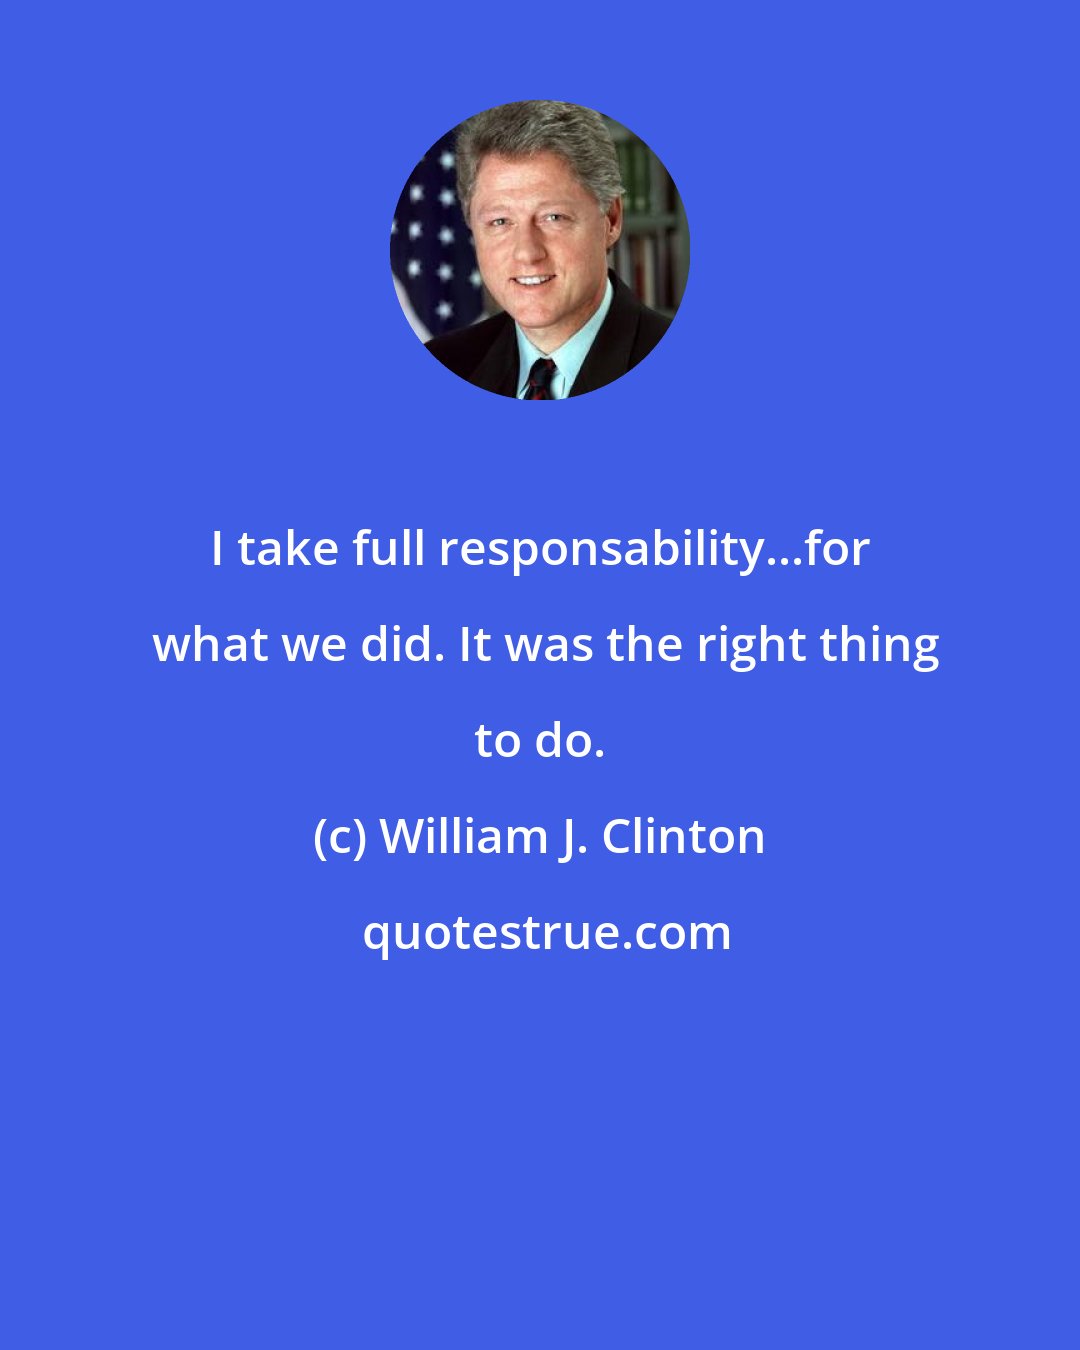 William J. Clinton: I take full responsability...for  what we did. It was the right thing to do.